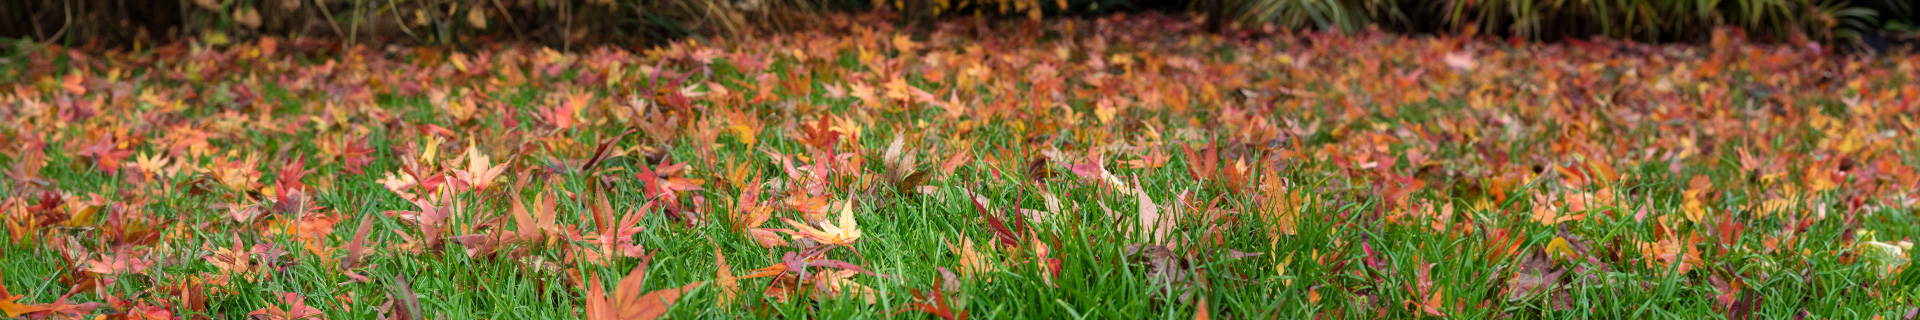 <p><strong>Keep your garden looking wonder-full this autumn</strong></p>
